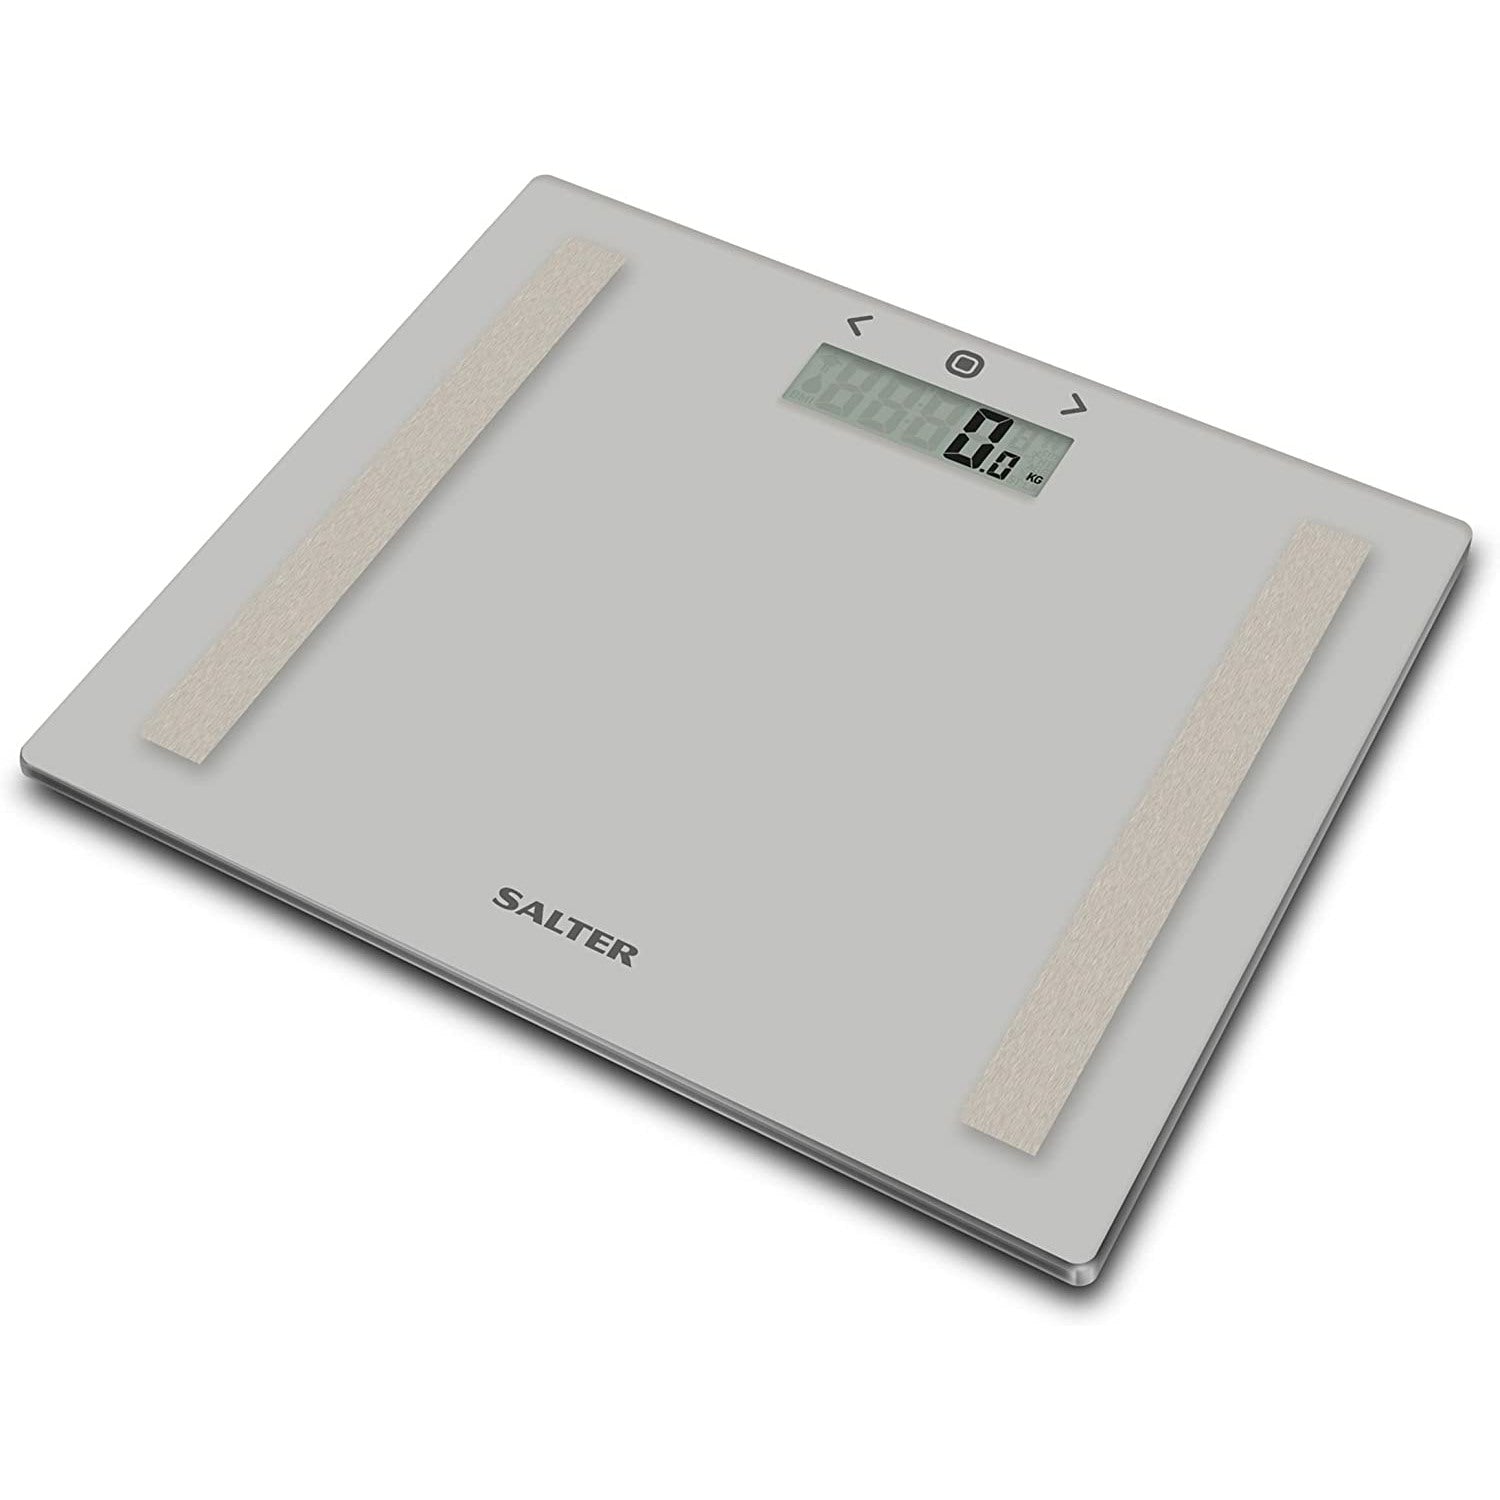 Salter Compact Glass Analyser Bathroom Scale: 9113 GY3R